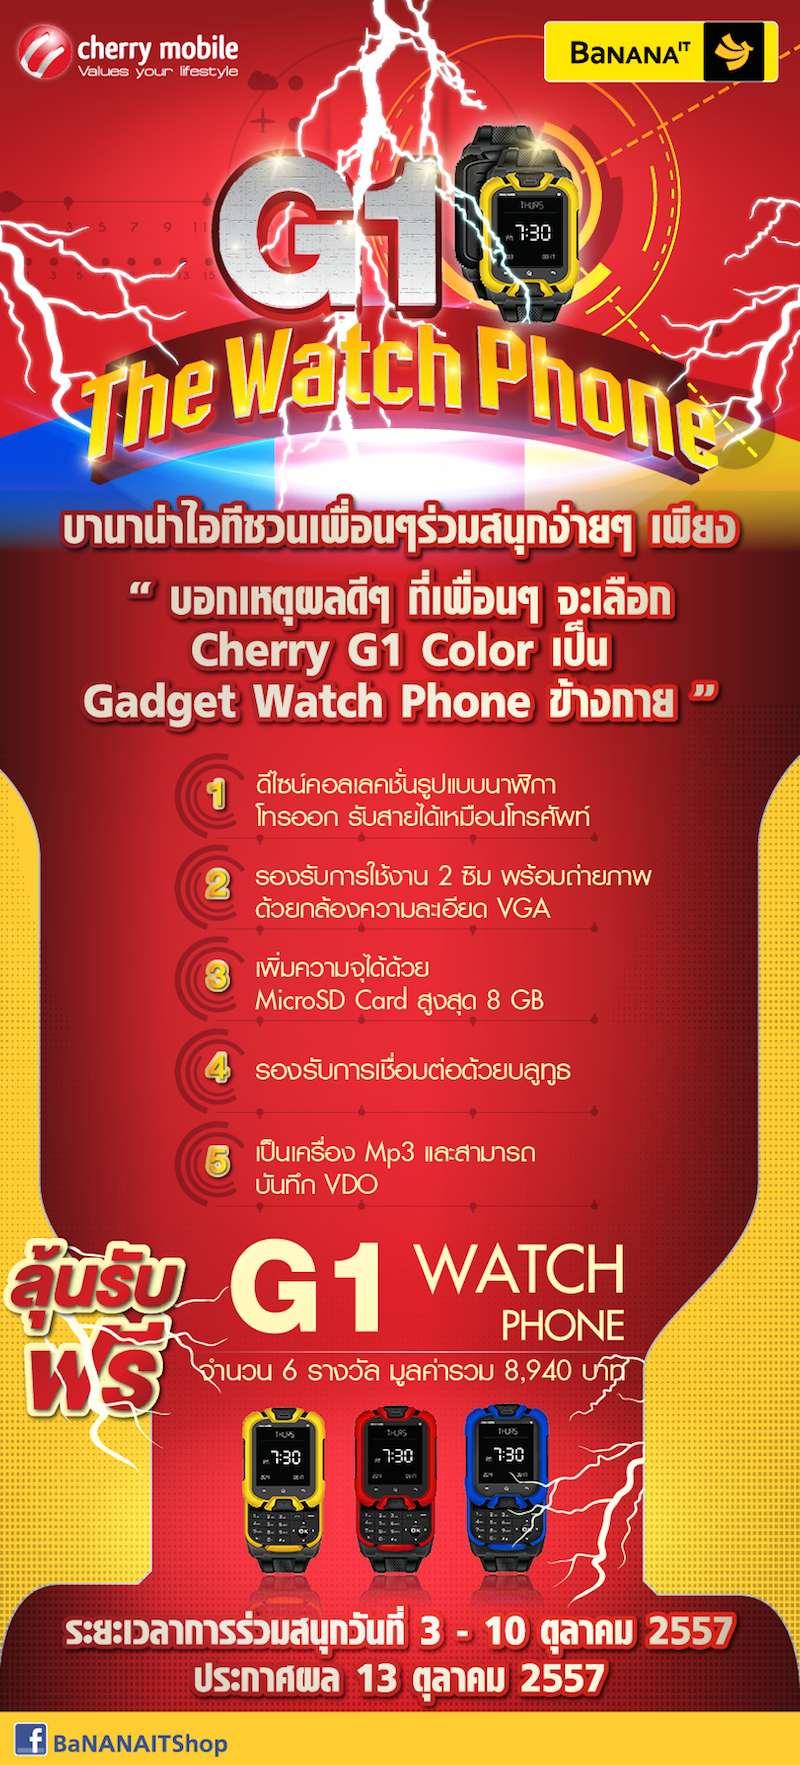 G1 The Watch Phone